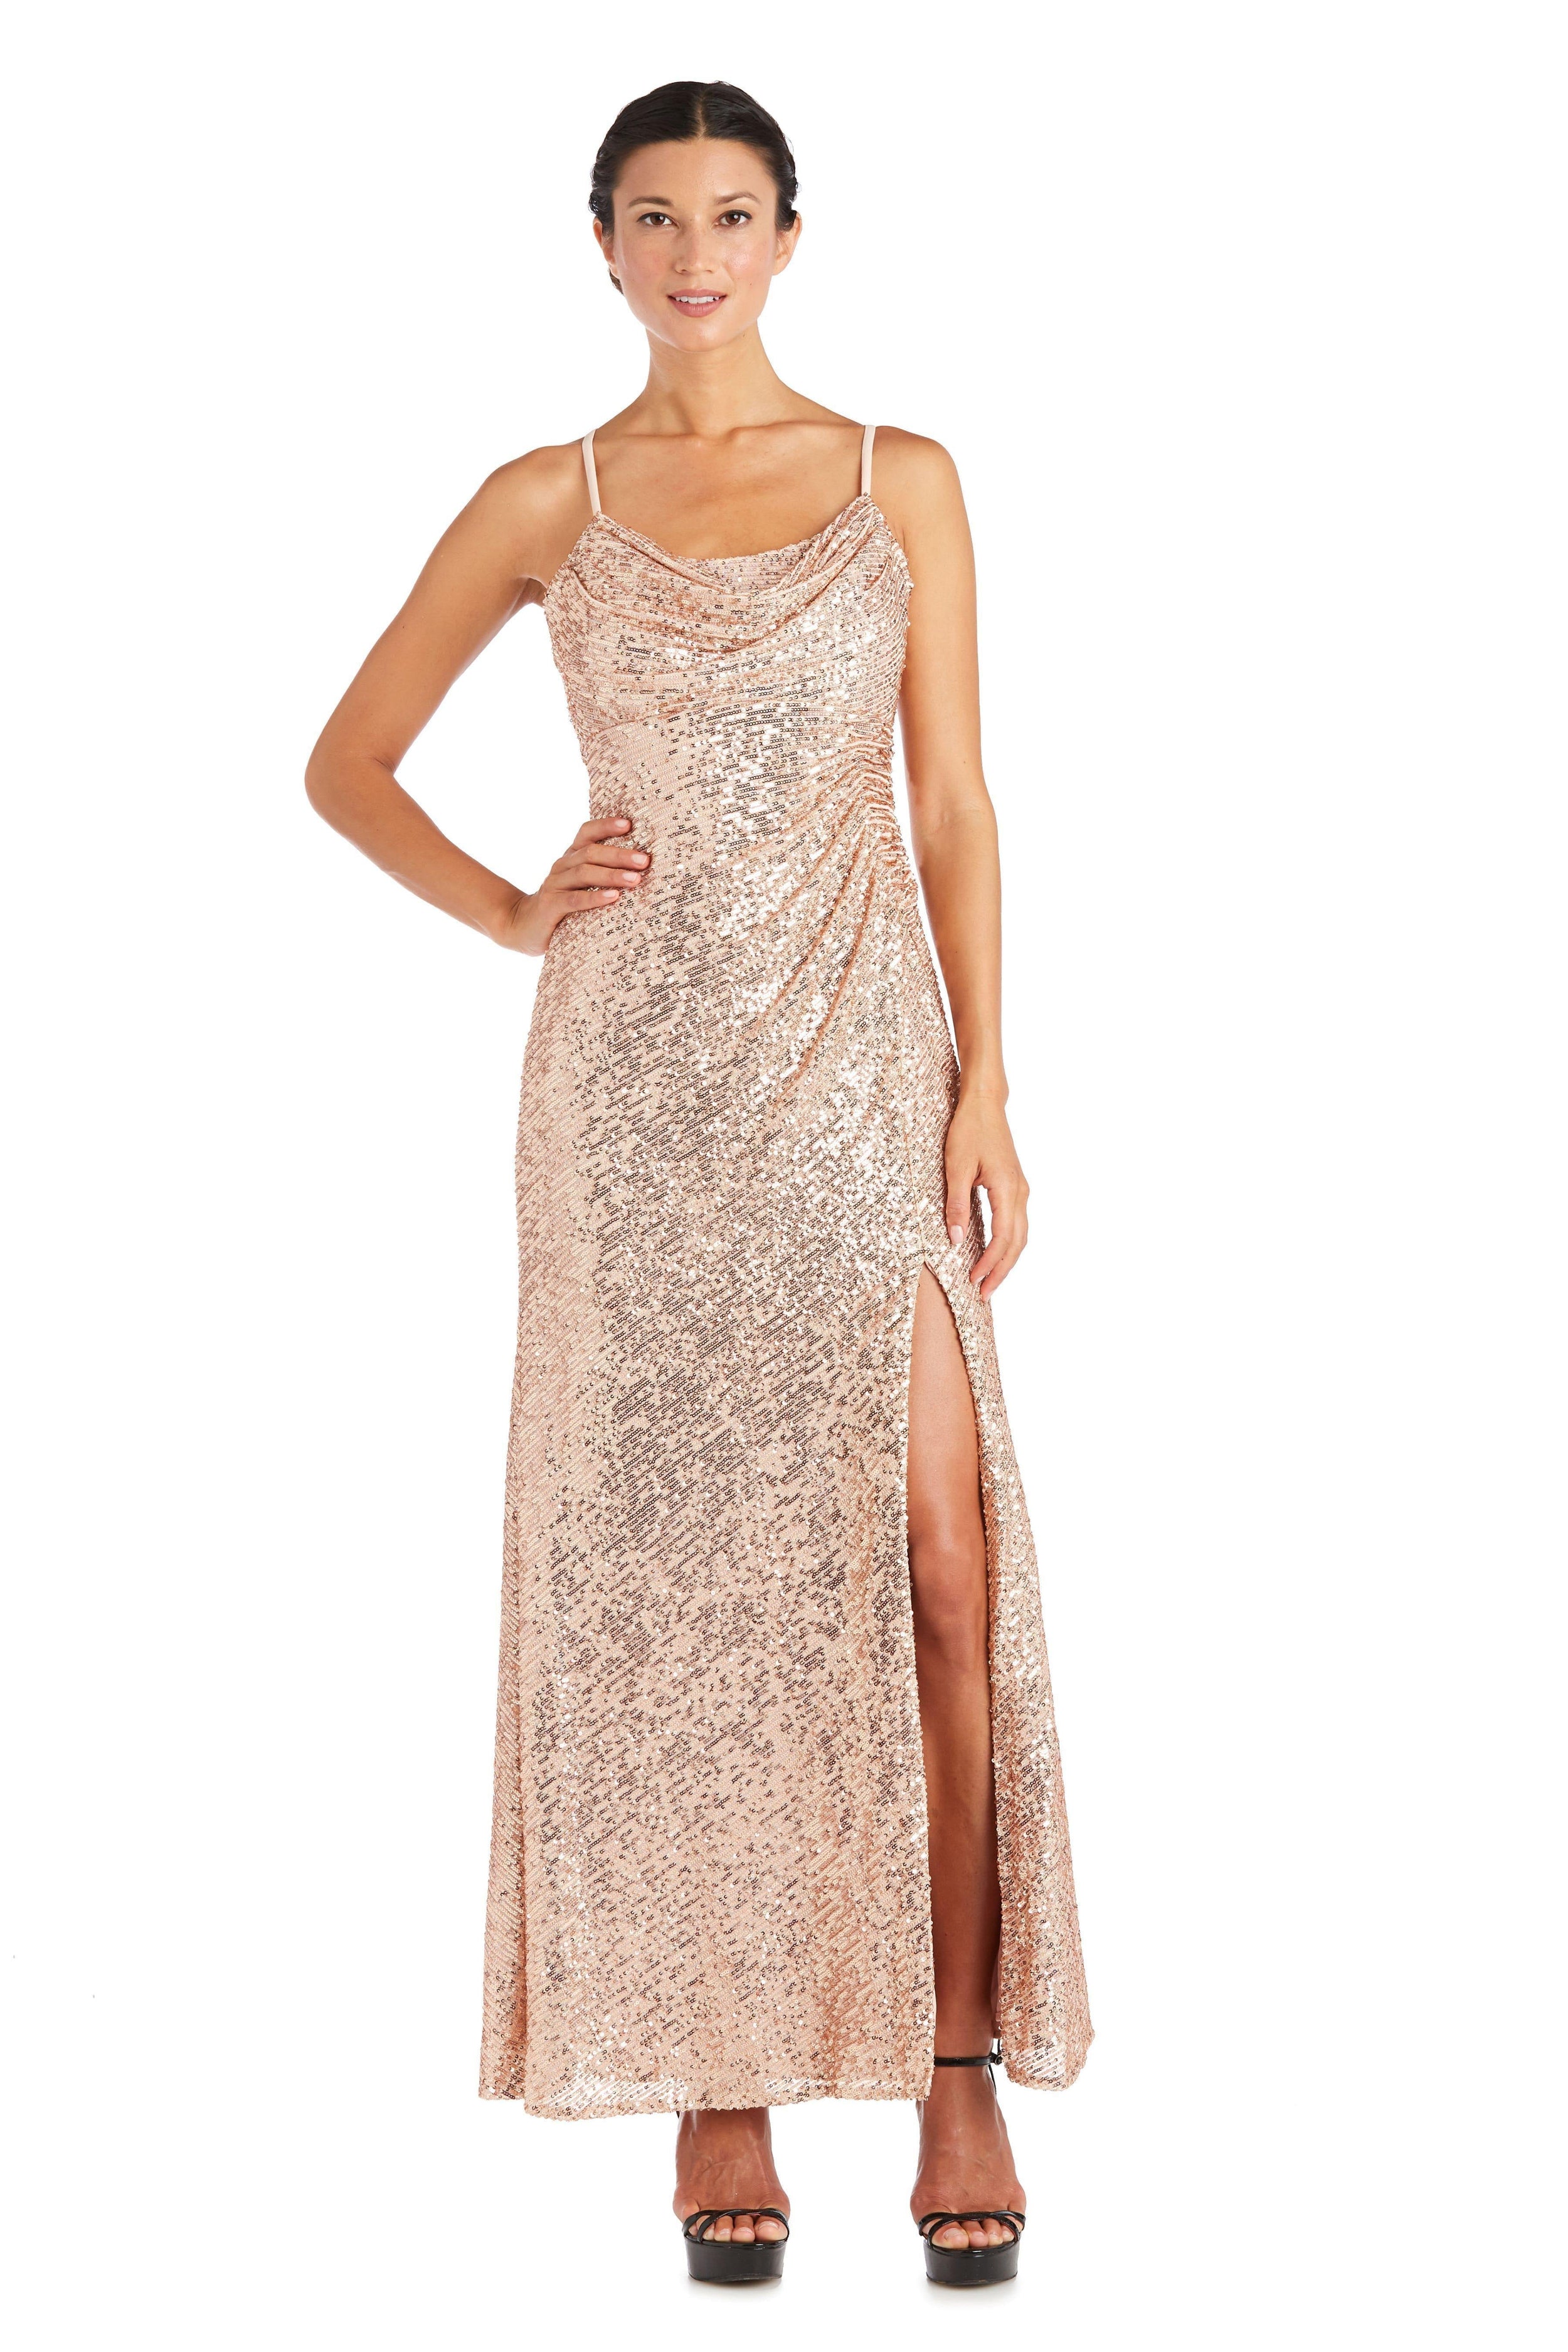 Nightway Long Formal Prom Dress 21936 - The Dress Outlet